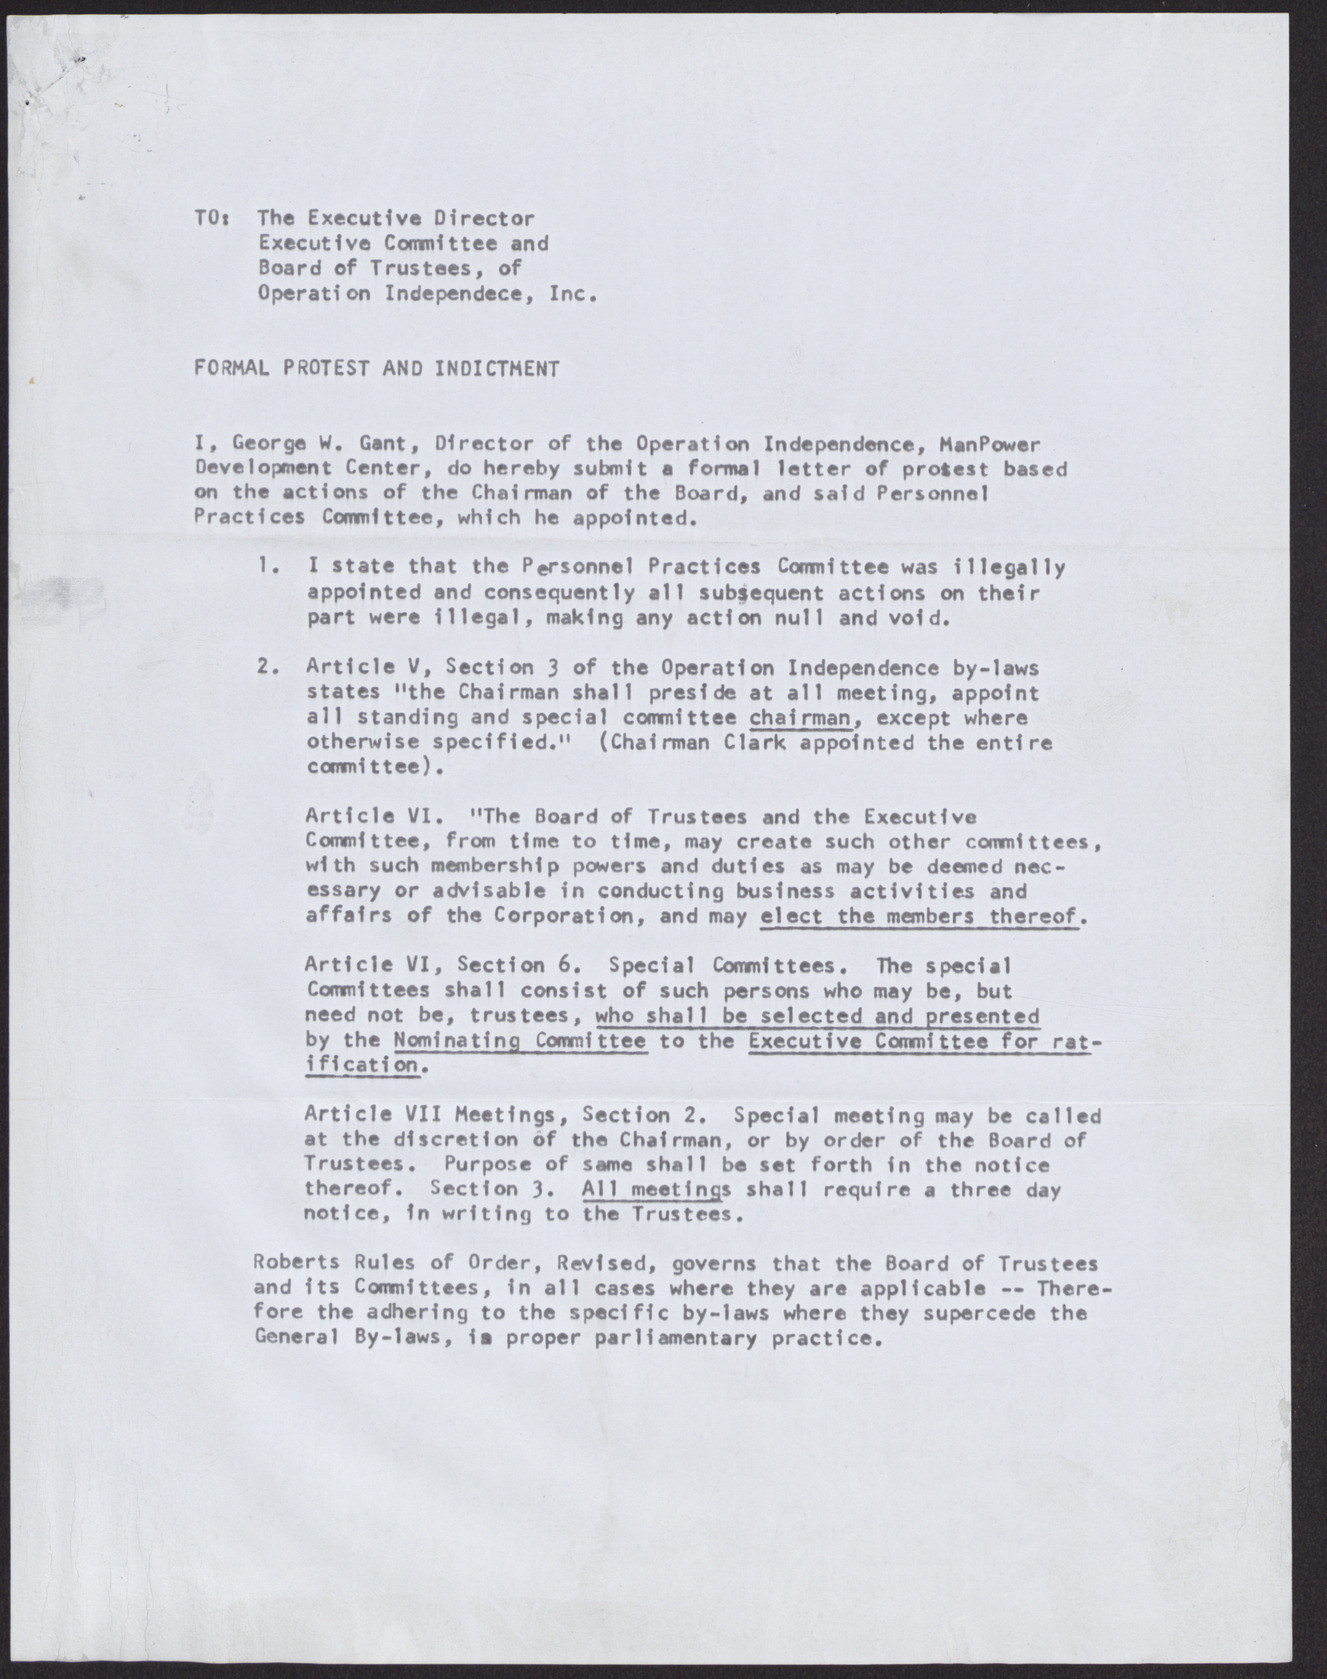 Letter to the Executive Director, Executive Committee and Board of Trustees of Operation Independence, Inc. from George W. Gant (4 pages), no date